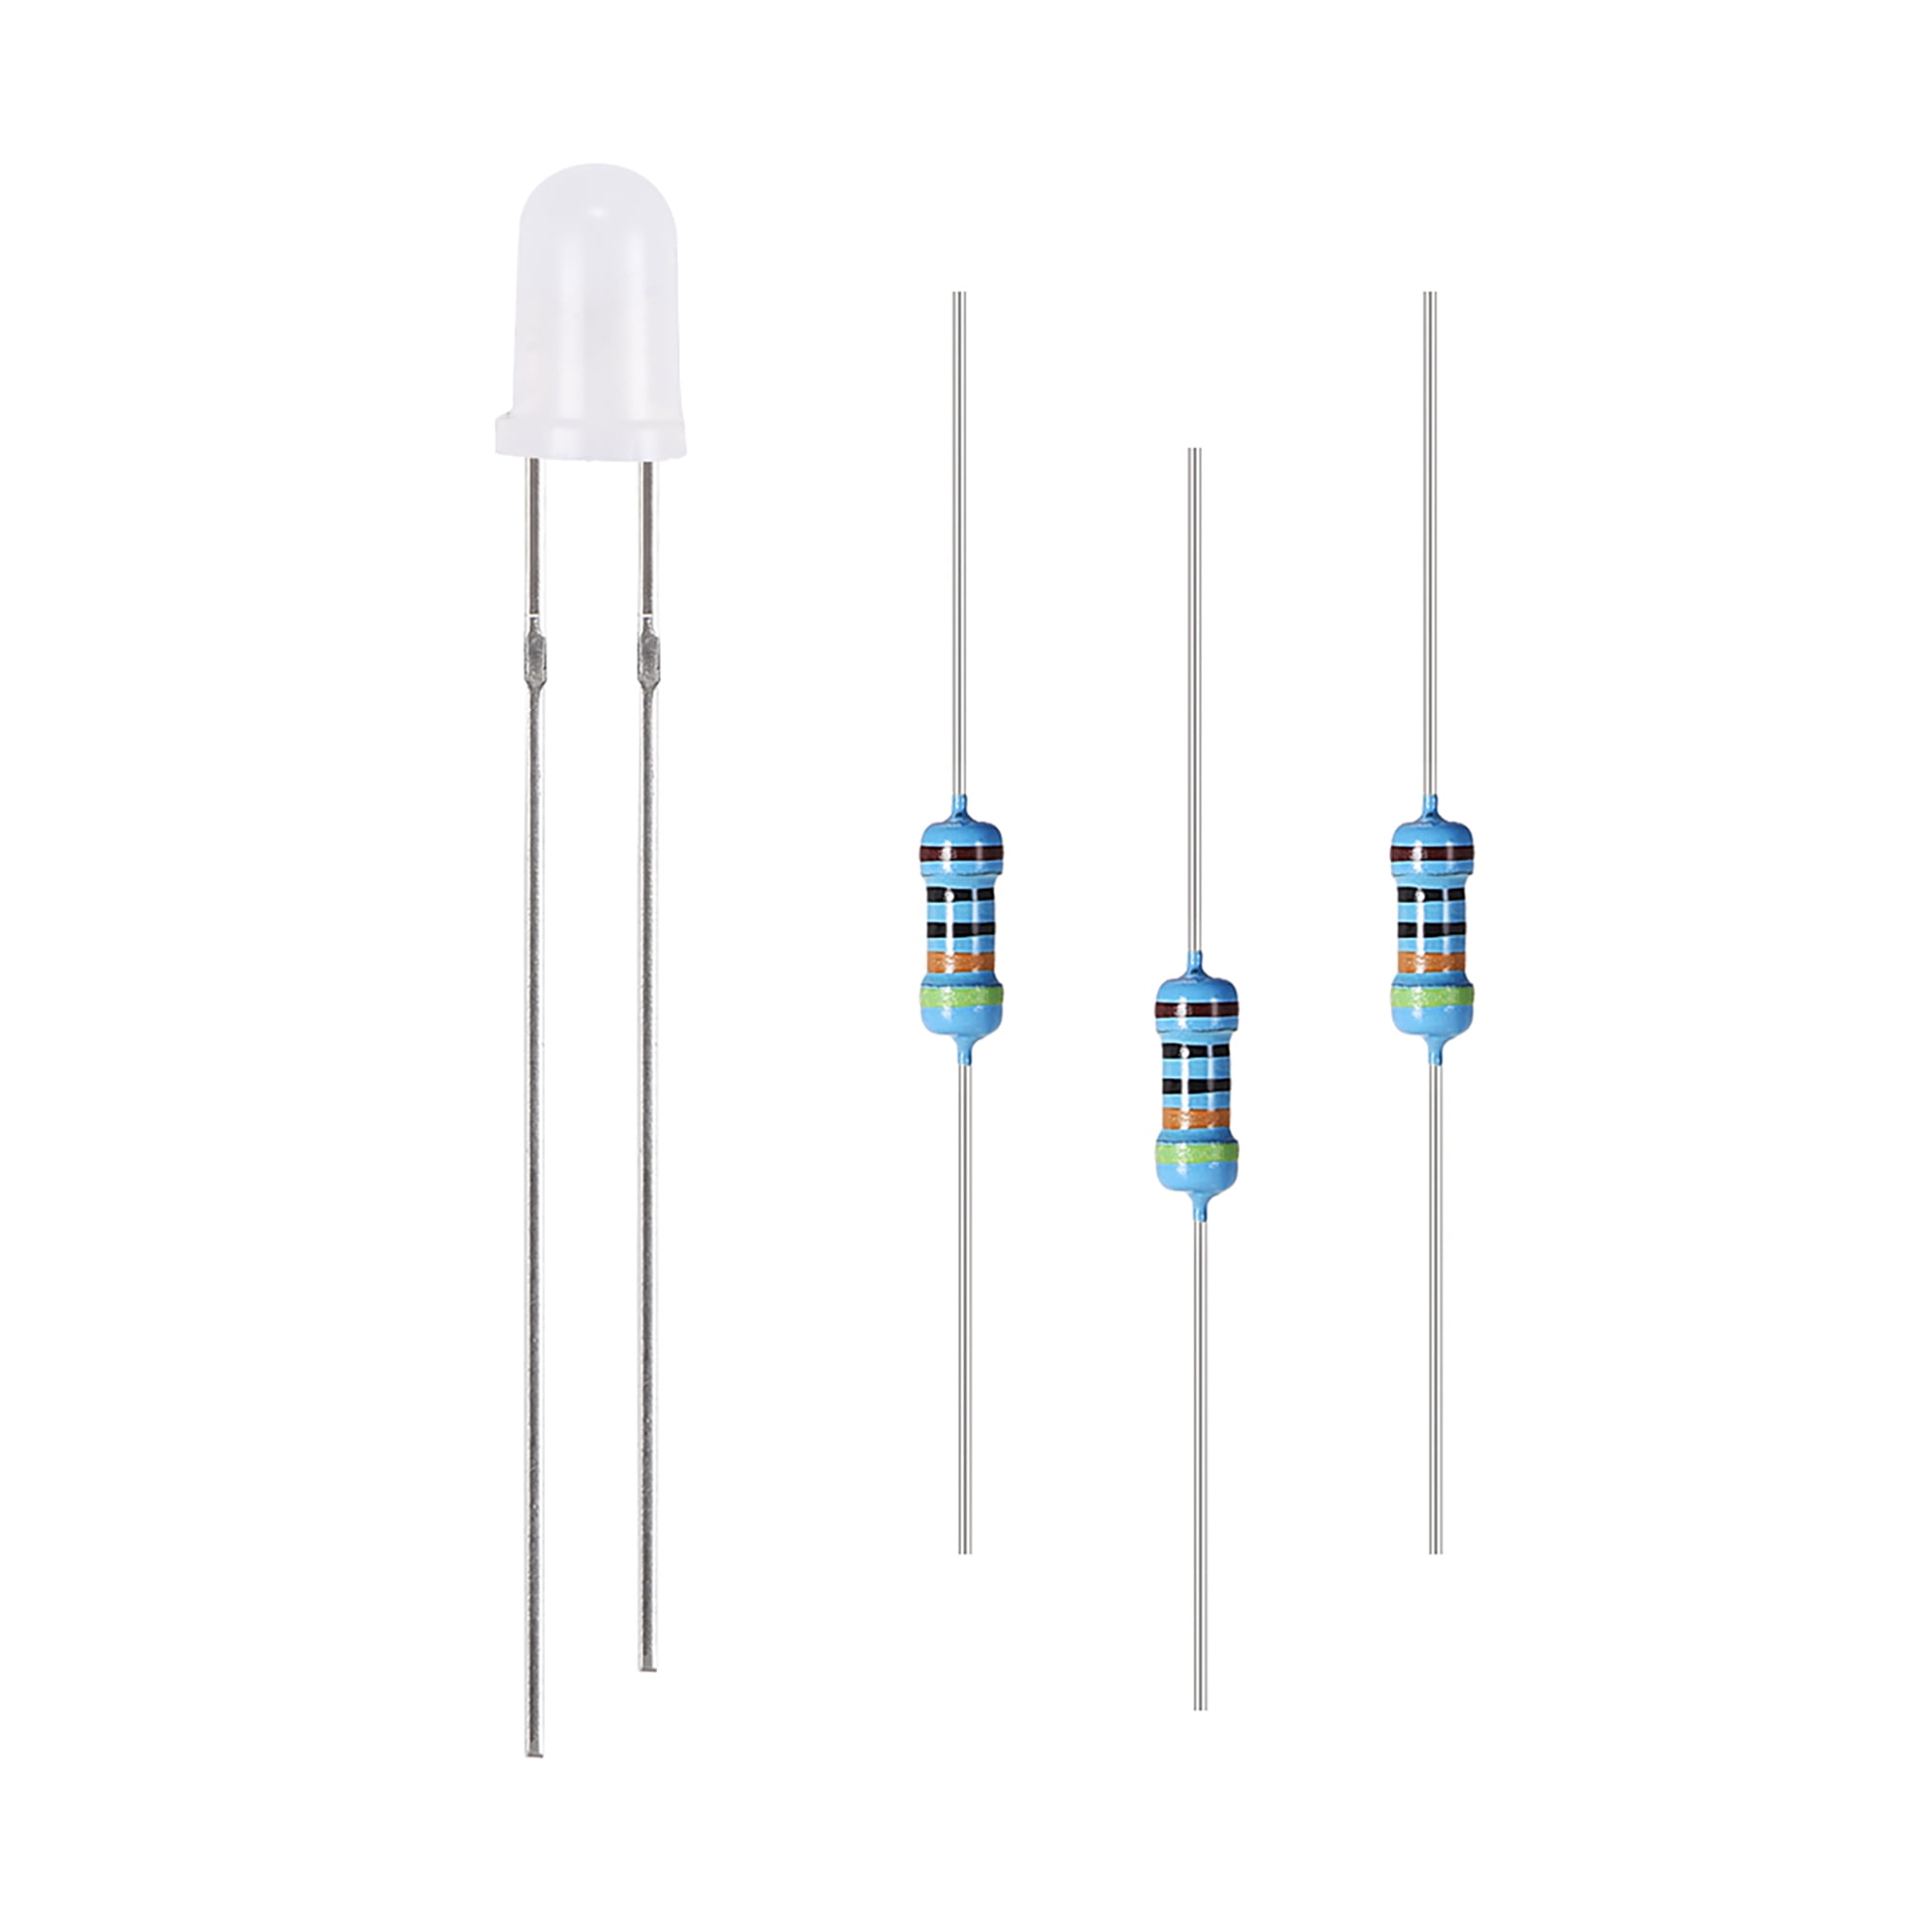 10 led 5mm flat top resistance 12v white blue red green yellow diodes 